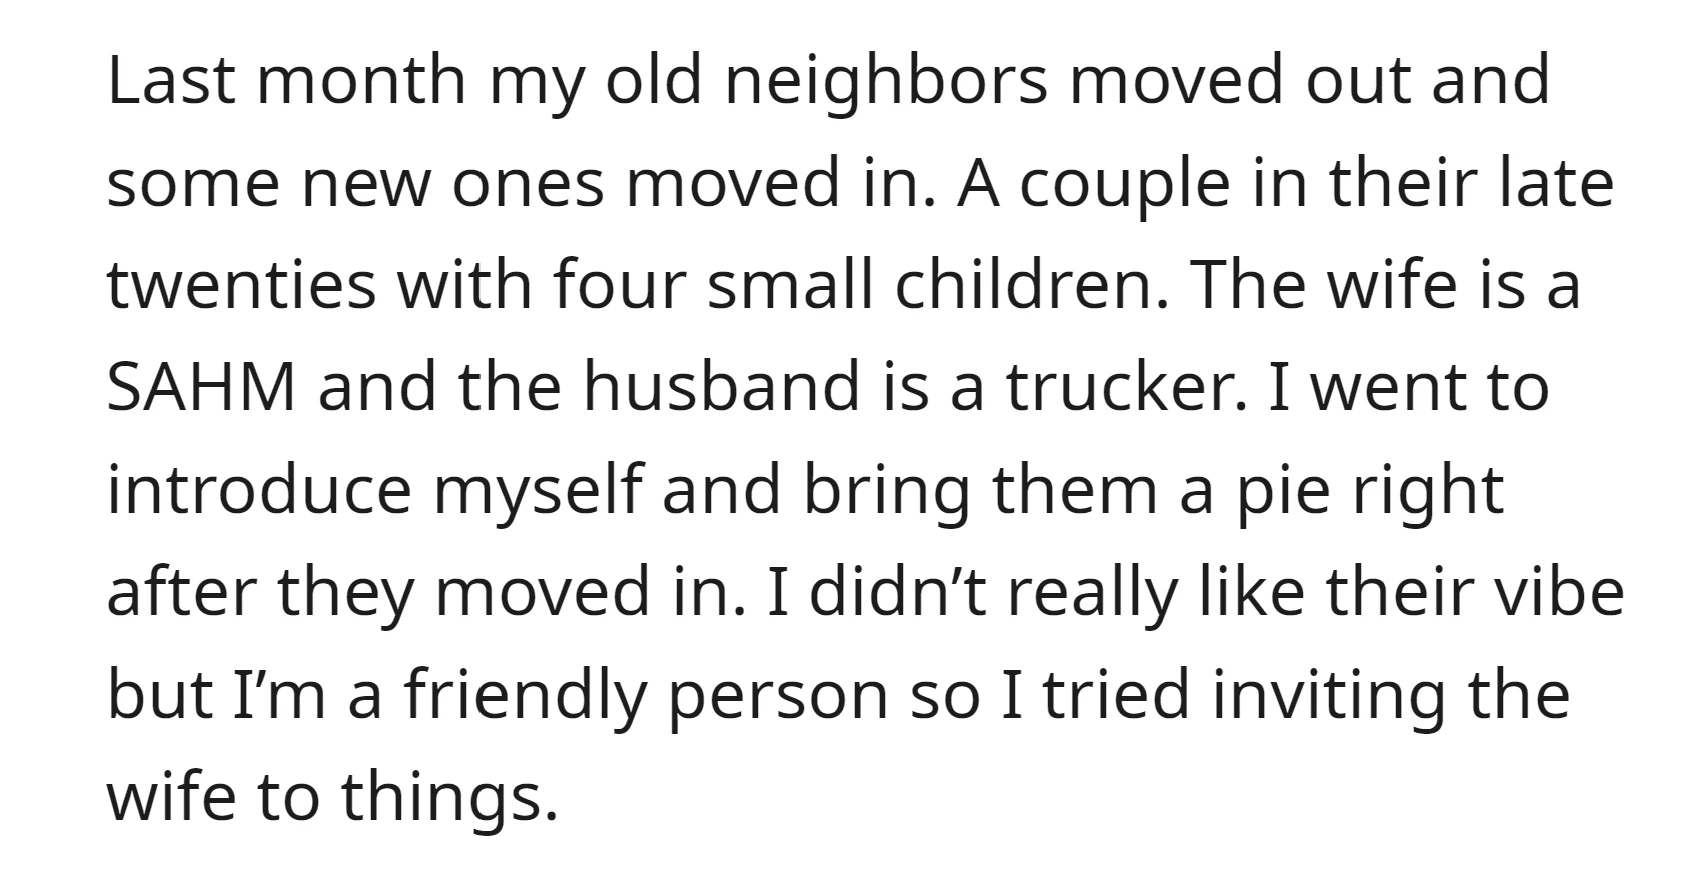 OP Tries To Be Nice With The New Neighbor